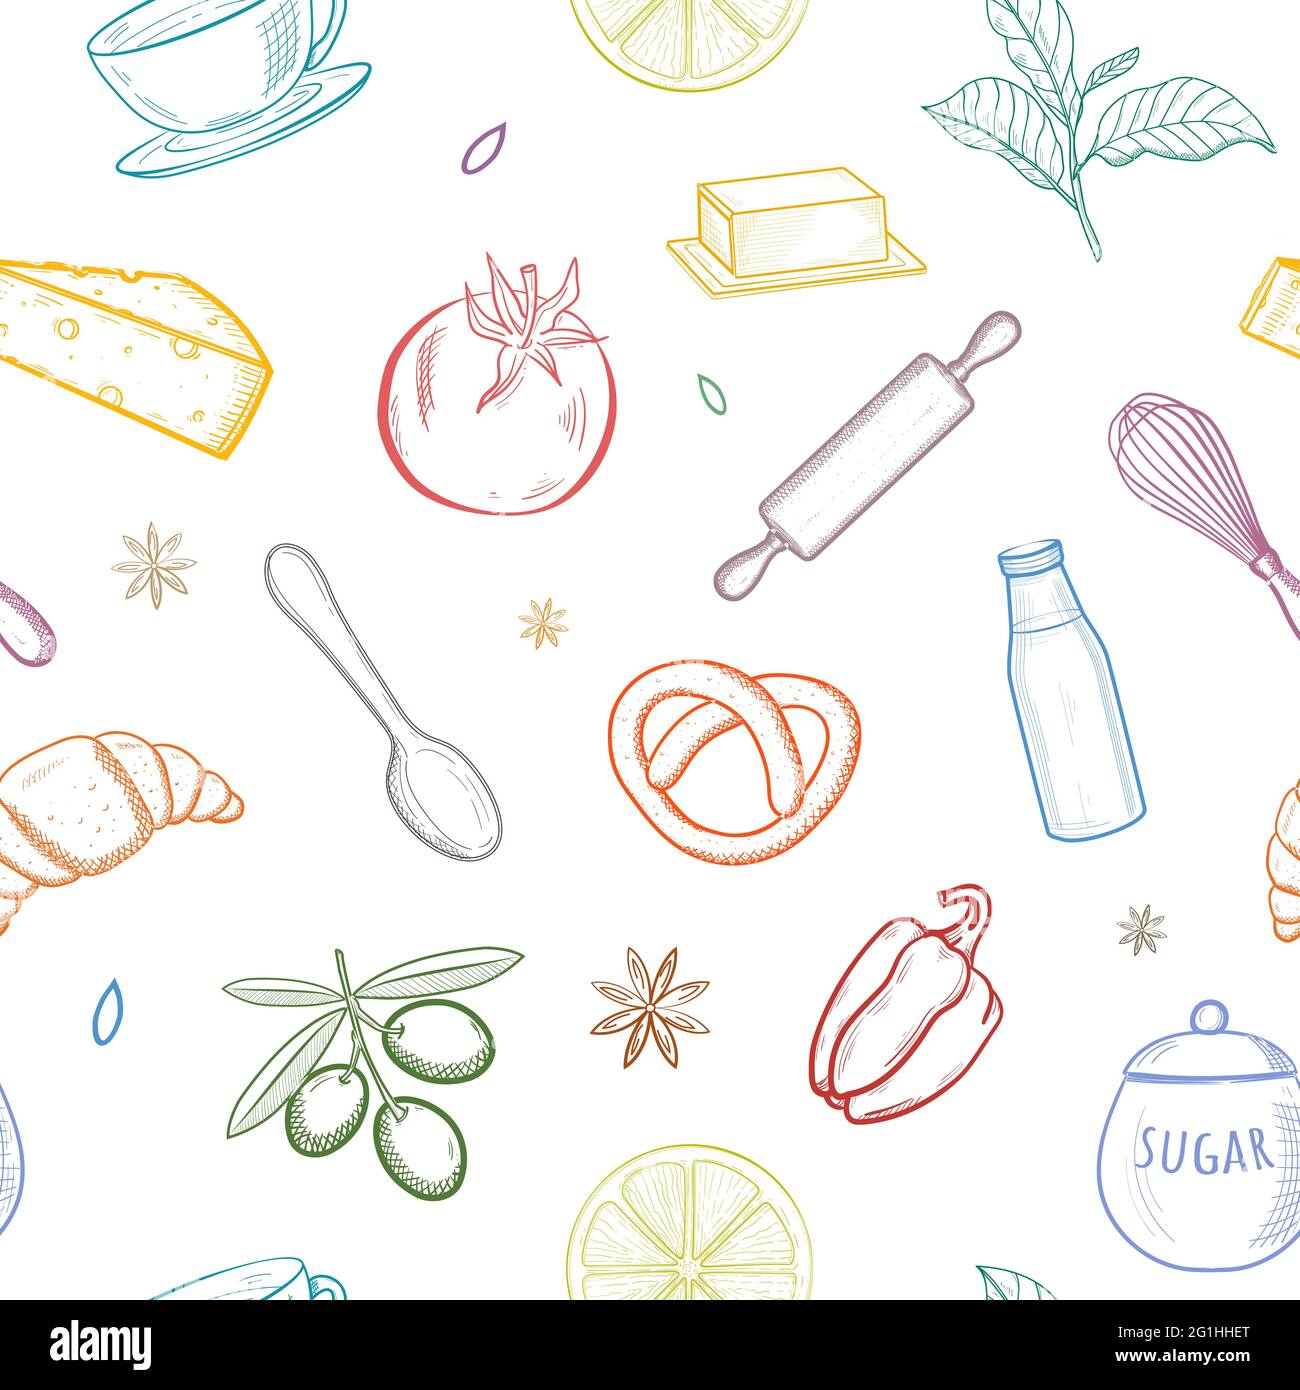 Seamless pattern with kitchen hand drawn sketch utensils. For wallpaper, pattern fills, textile, web page background, surface textures. Colorful Vecto Stock Vector